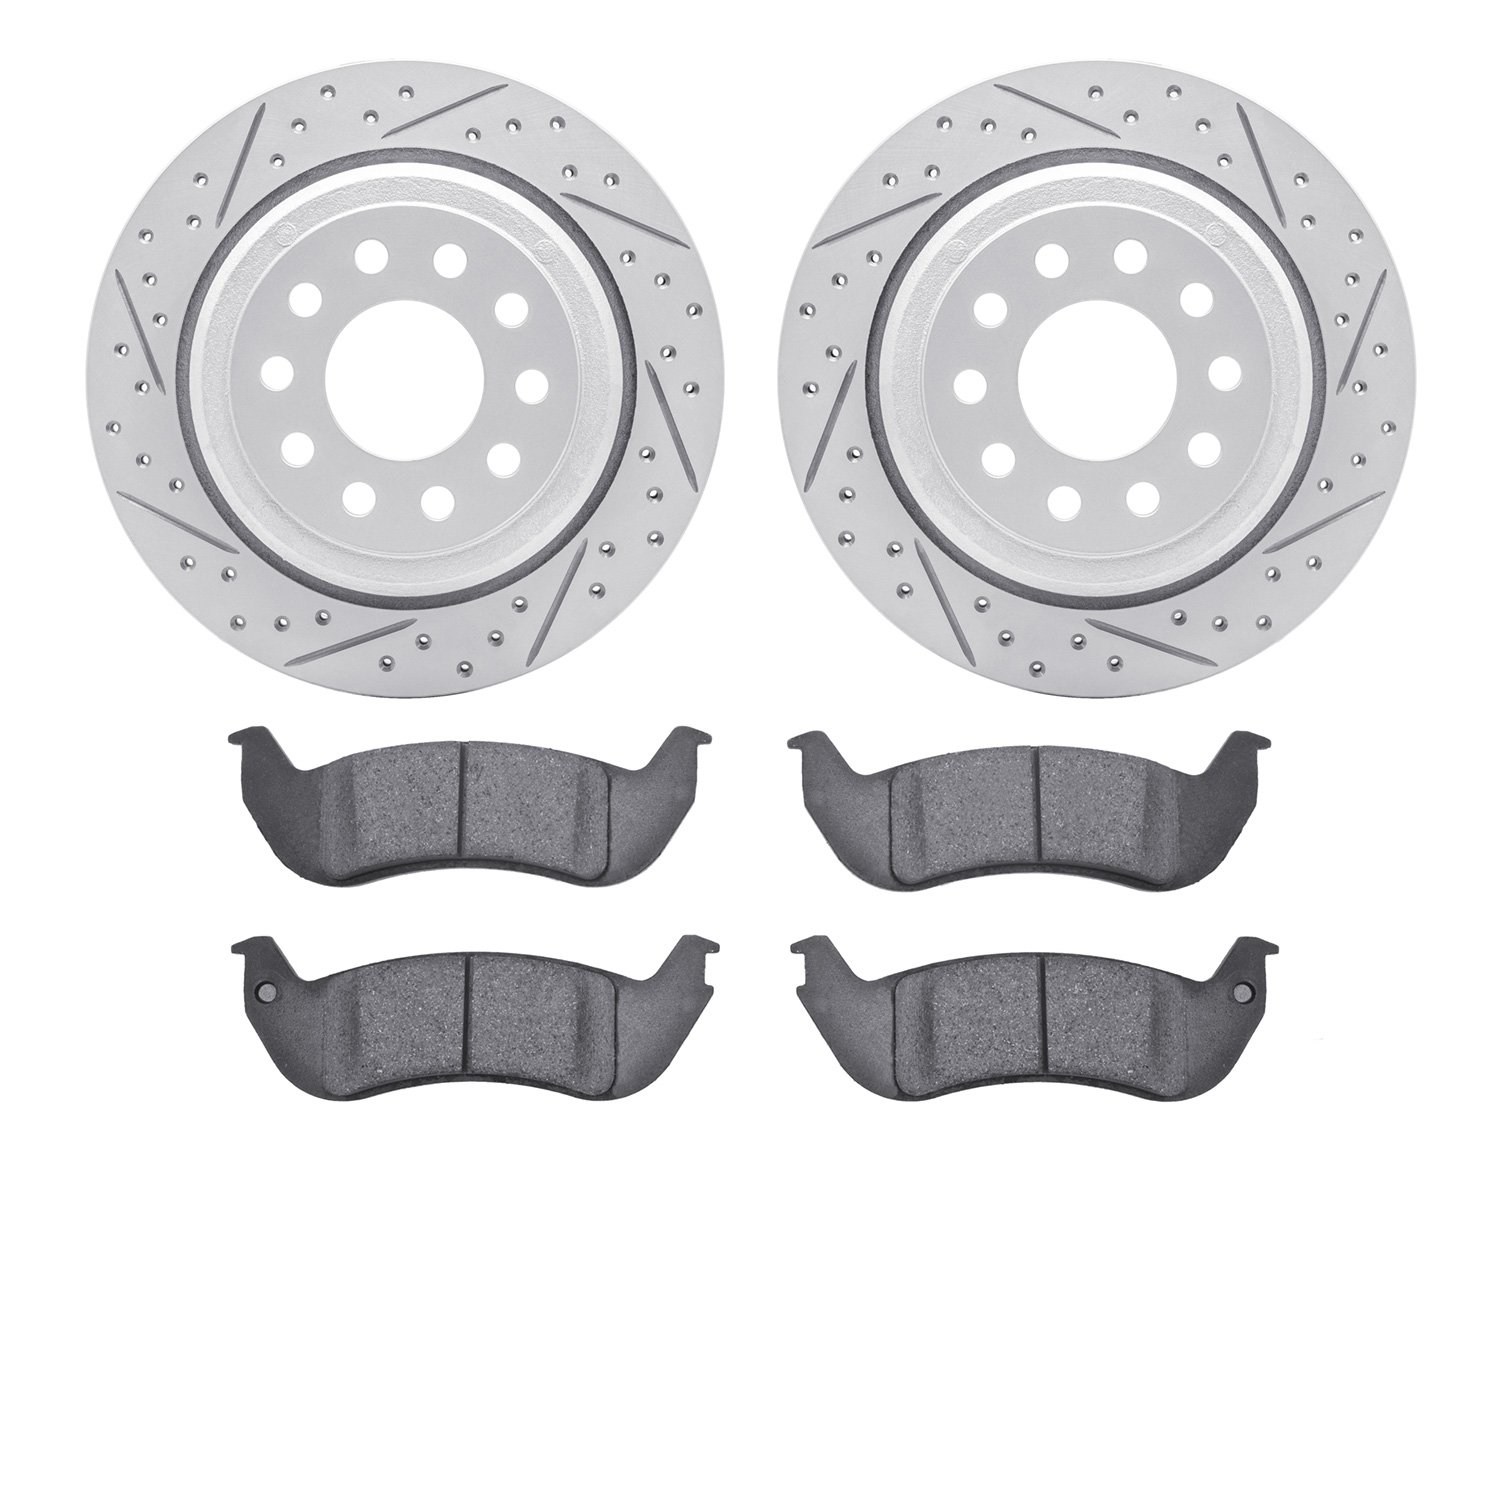 2502-55000 Geoperformance Drilled/Slotted Rotors w/5000 Advanced Brake Pads Kit, 2003-2011 Ford/Lincoln/Mercury/Mazda, Position: